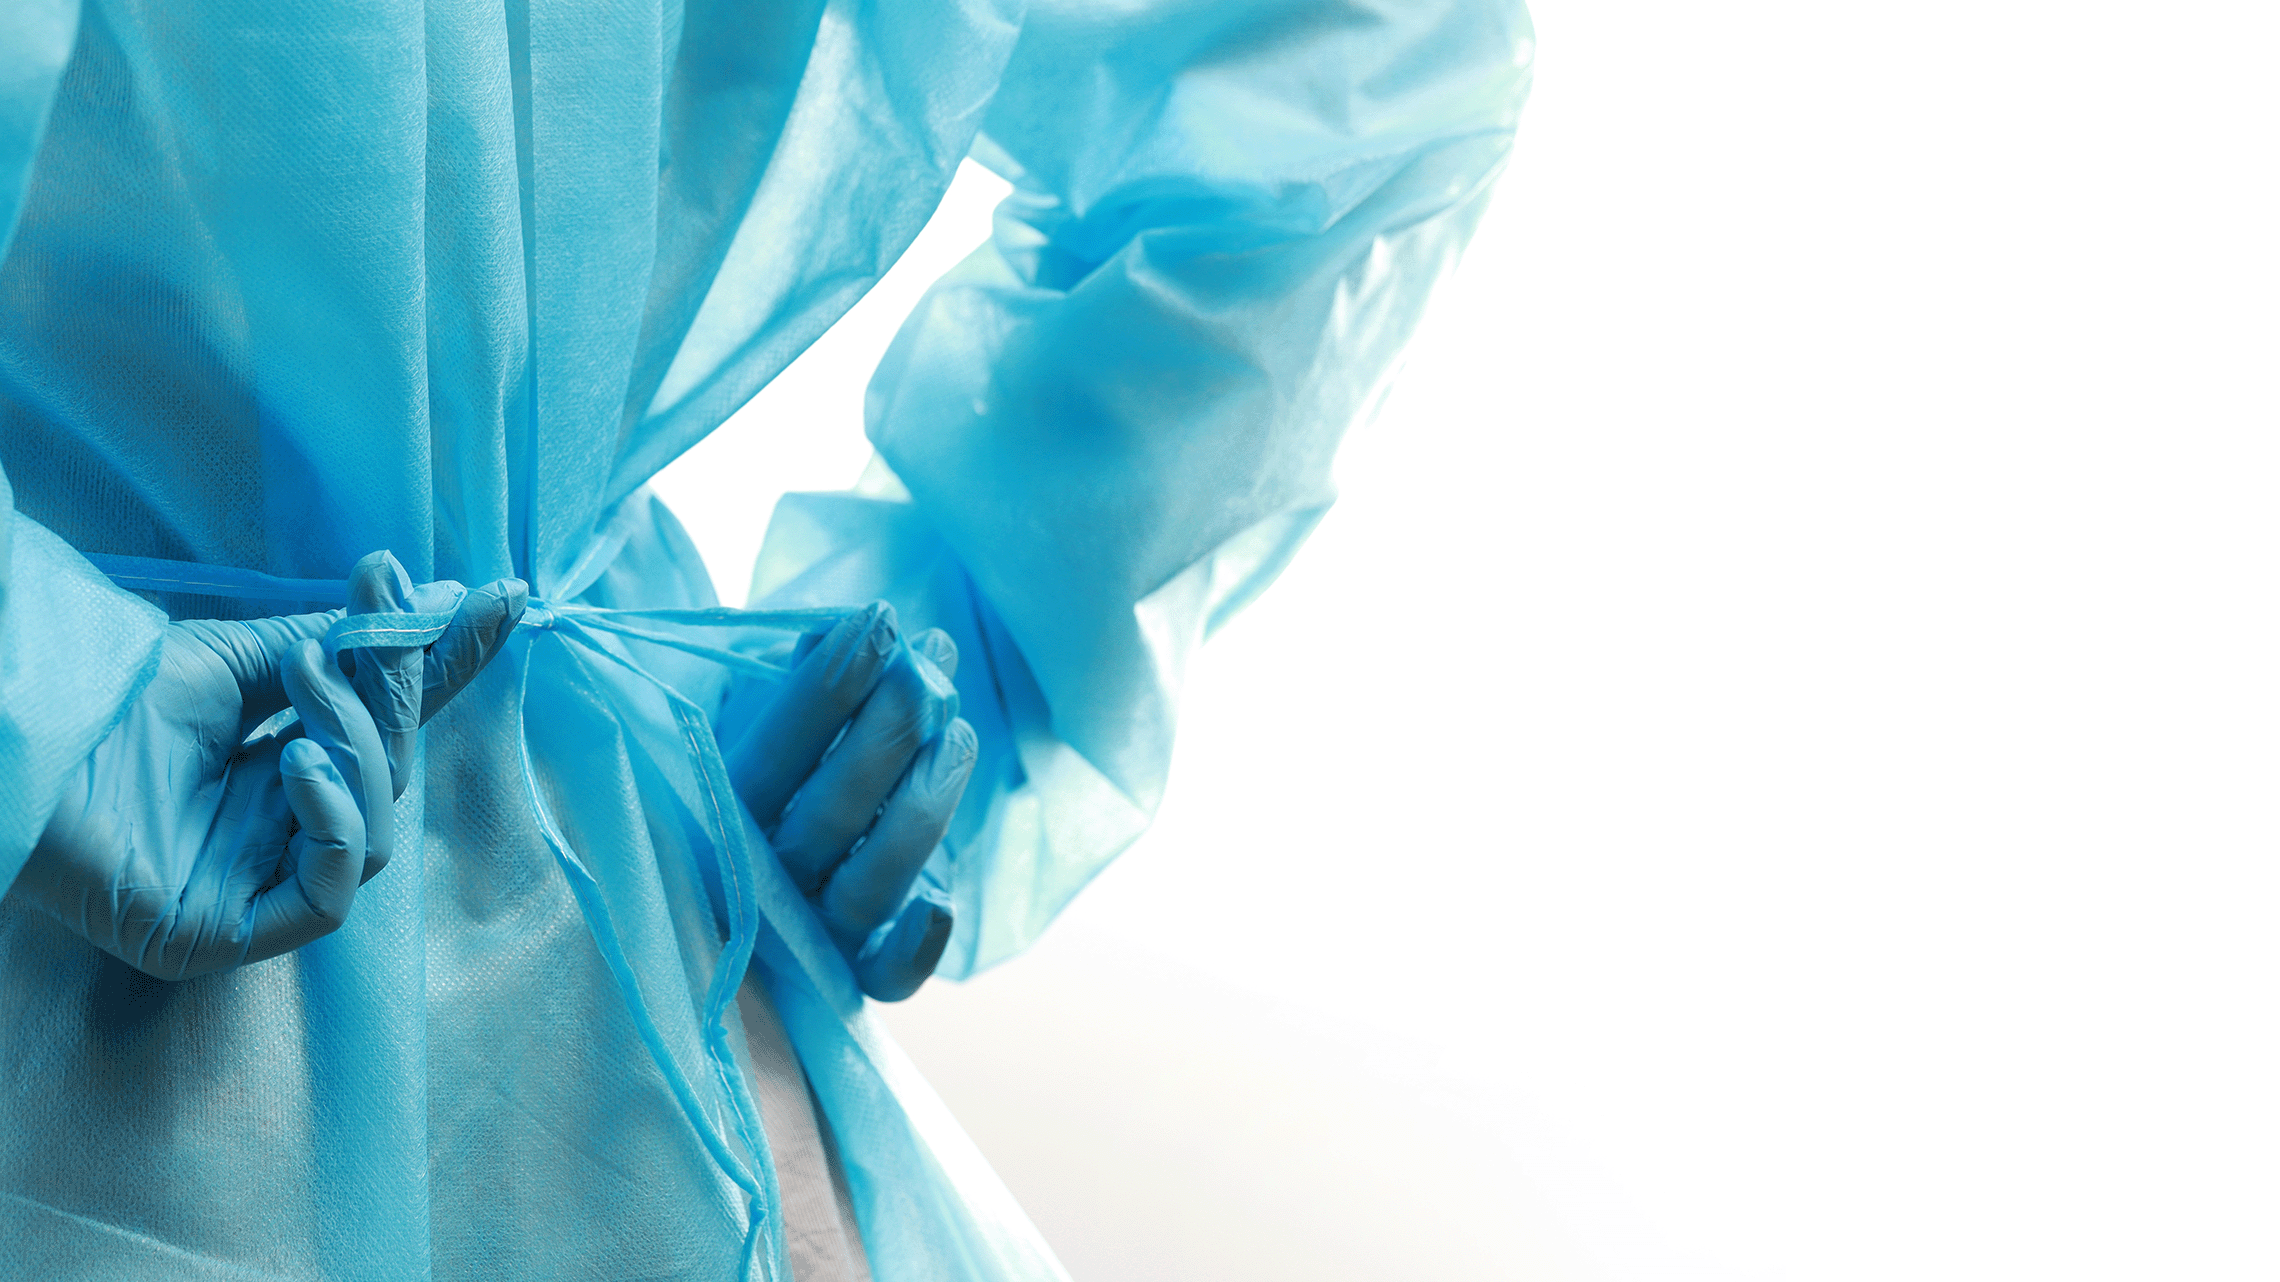 Gloved person tying PPE gown